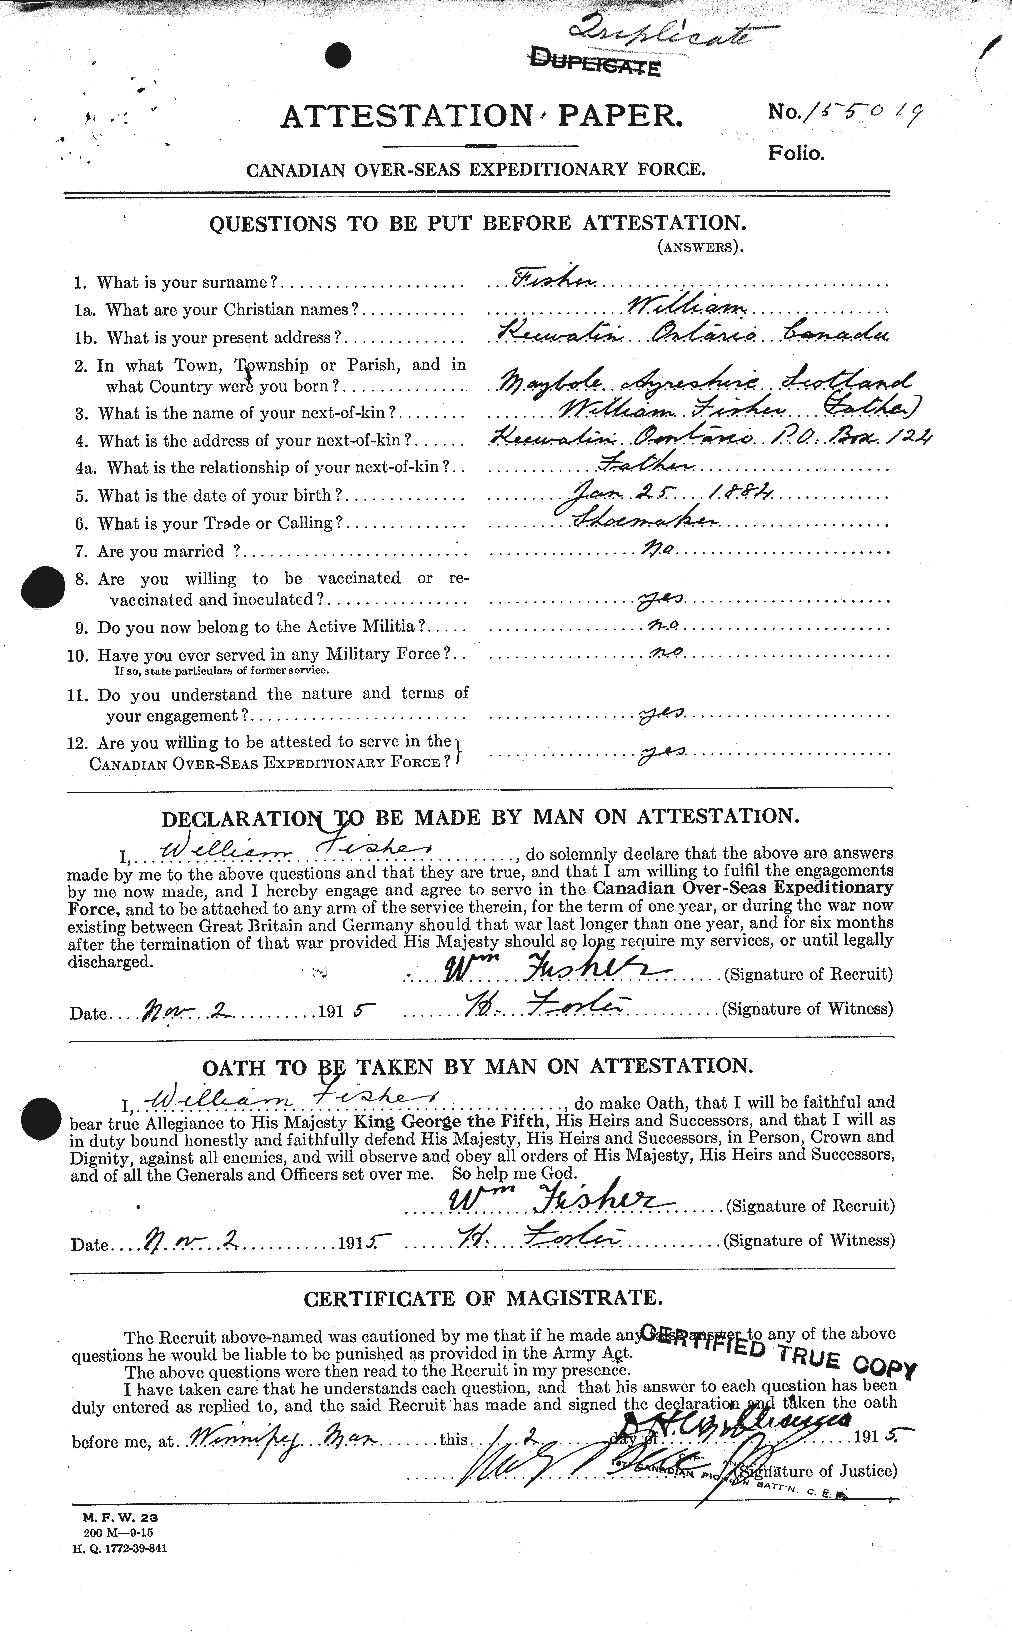 Personnel Records of the First World War - CEF 322423a